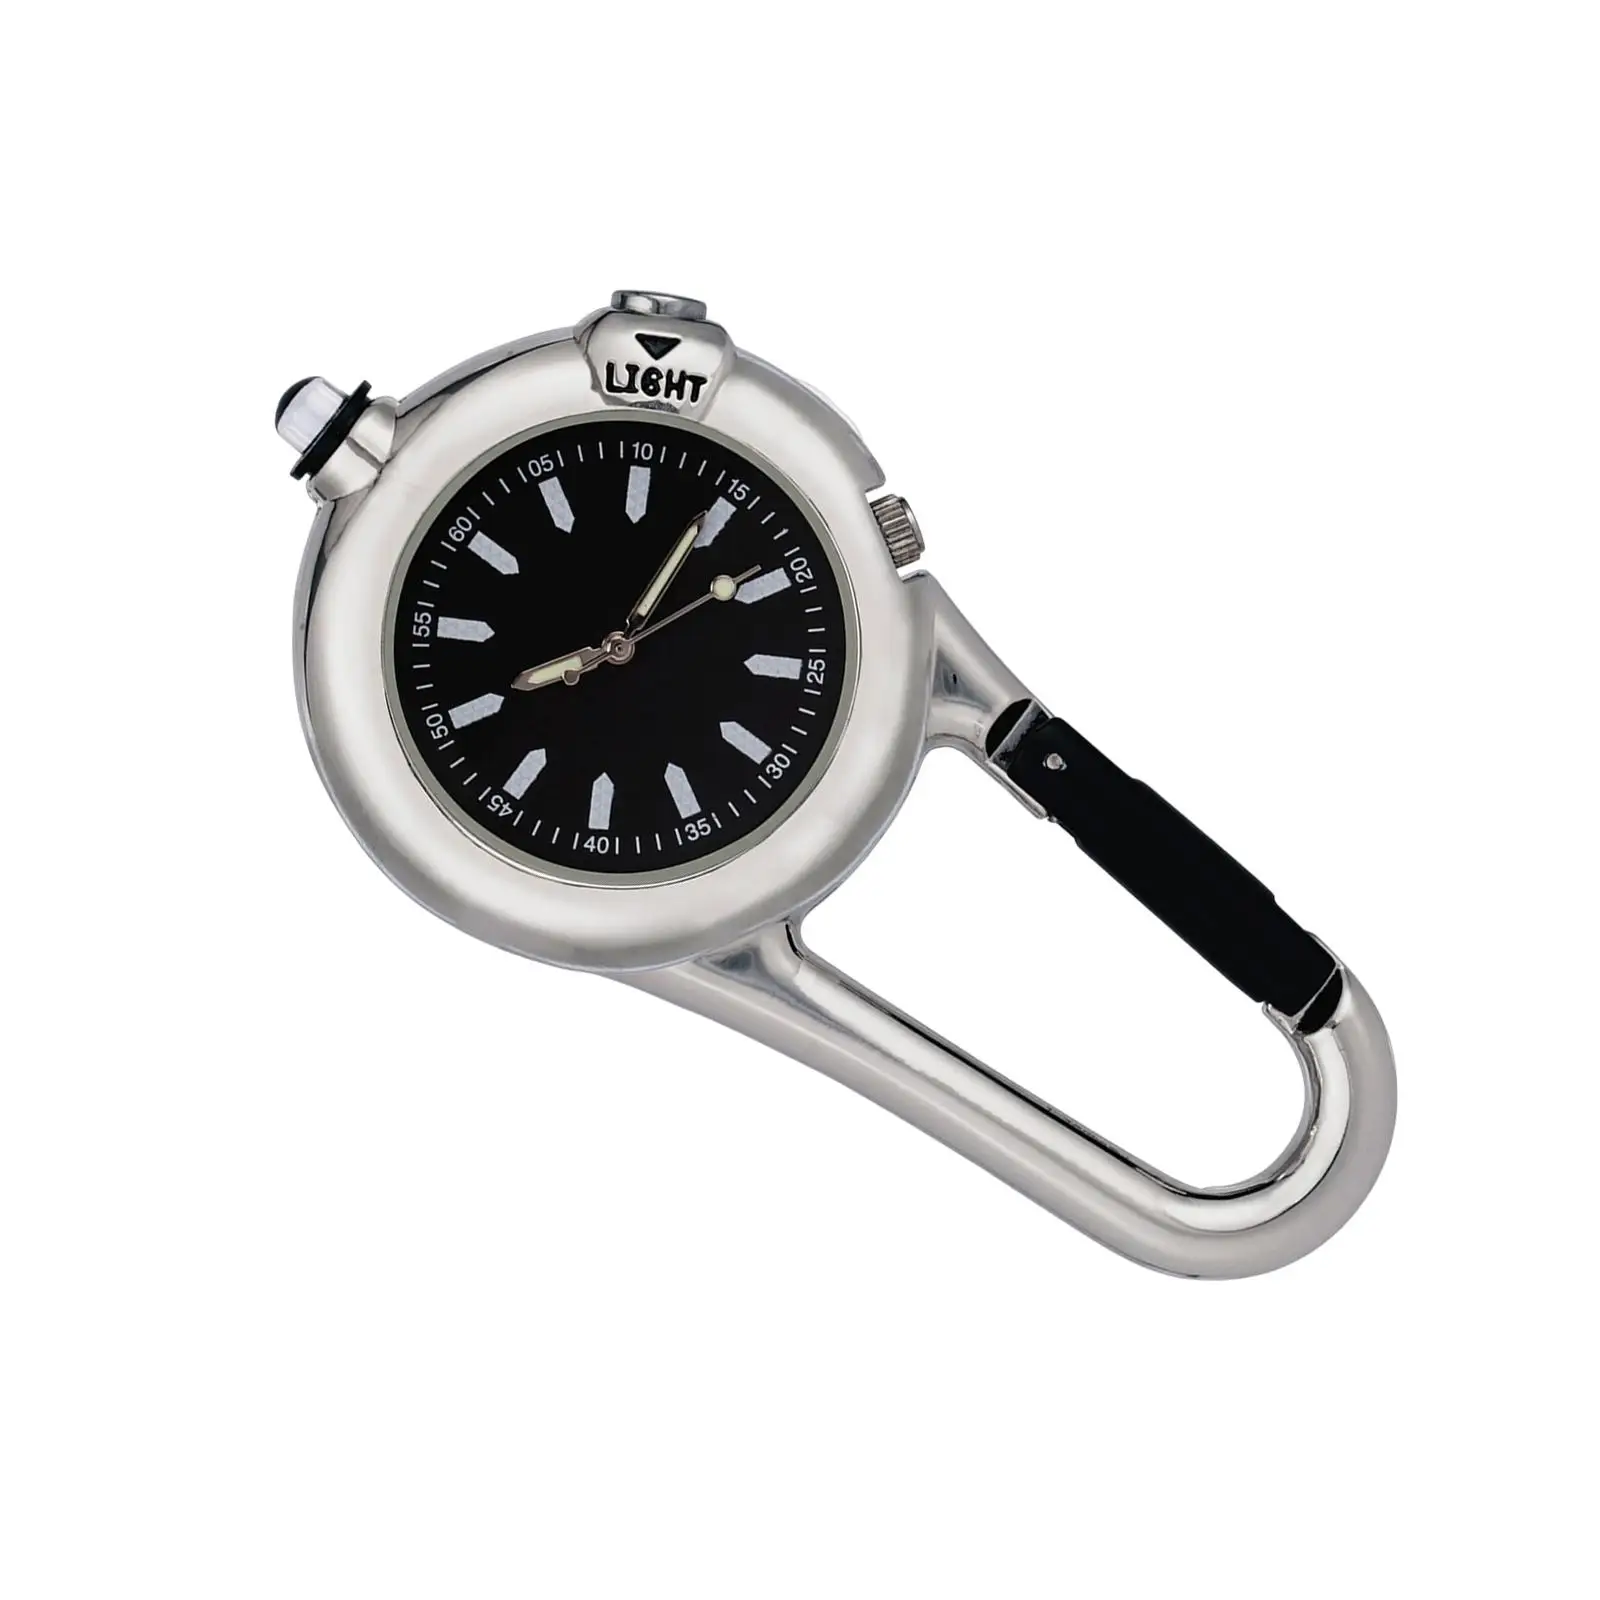 Mini Clip On Carabiner Pocket Watch Men Women Backpack Watch Climbing Watch for Outdoor Hiking Office Camping Accessories